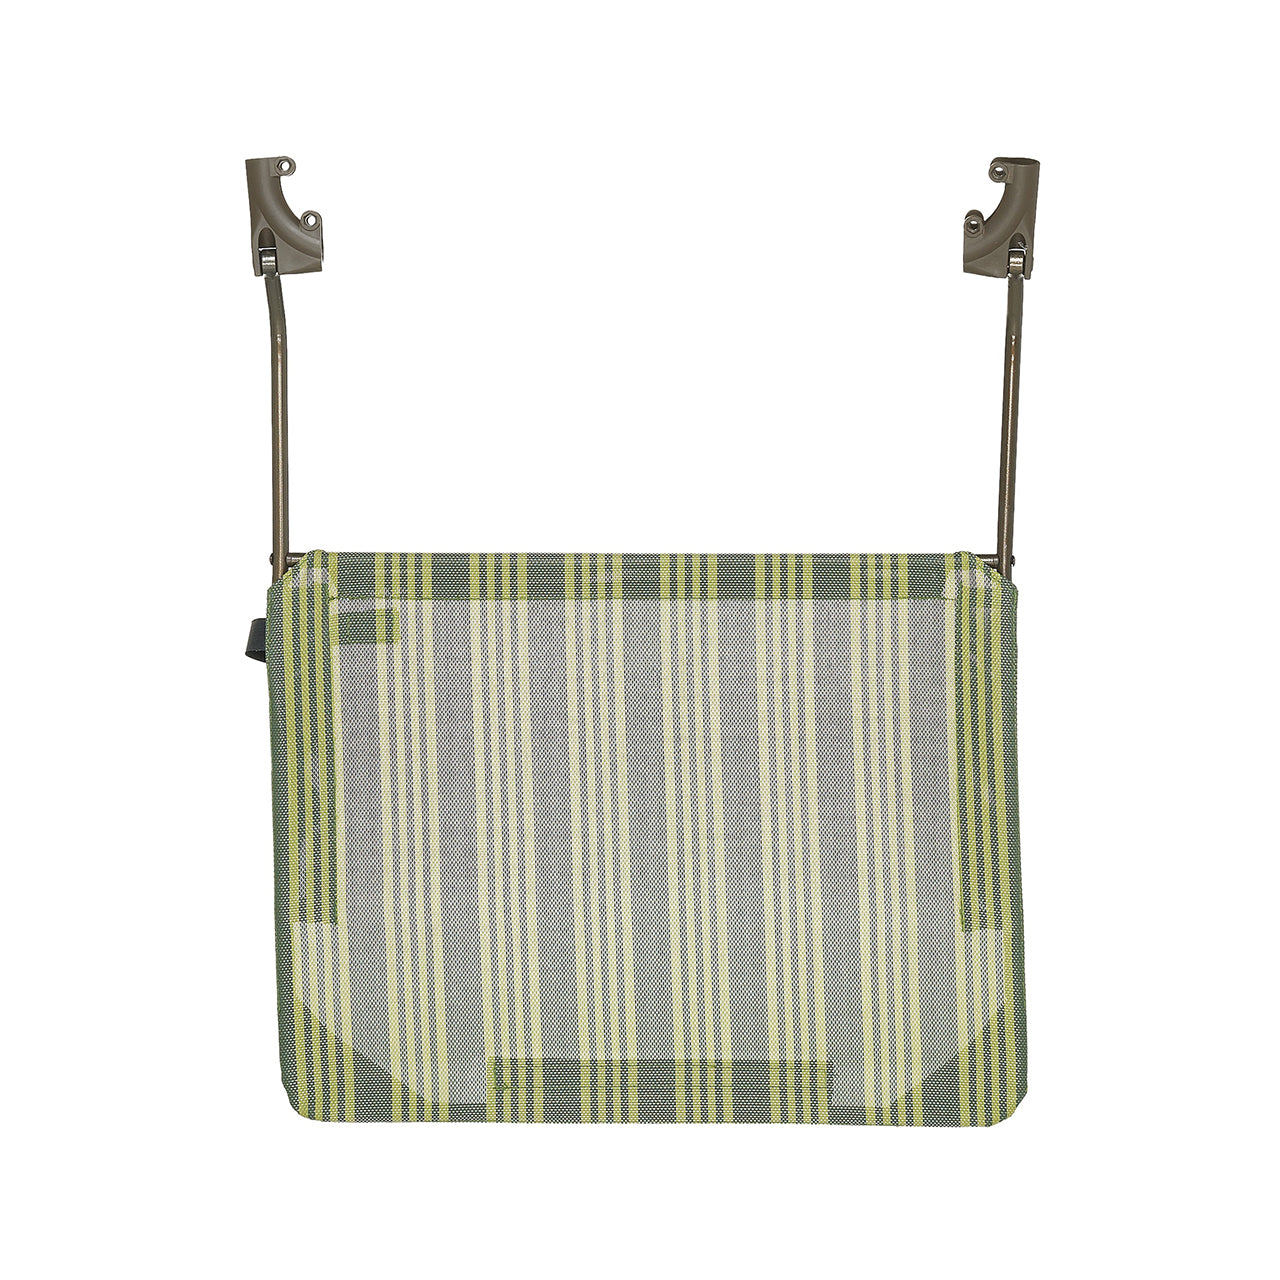 Bliss Hammocks Canopy for Rocking Chair in the green stripe variation.